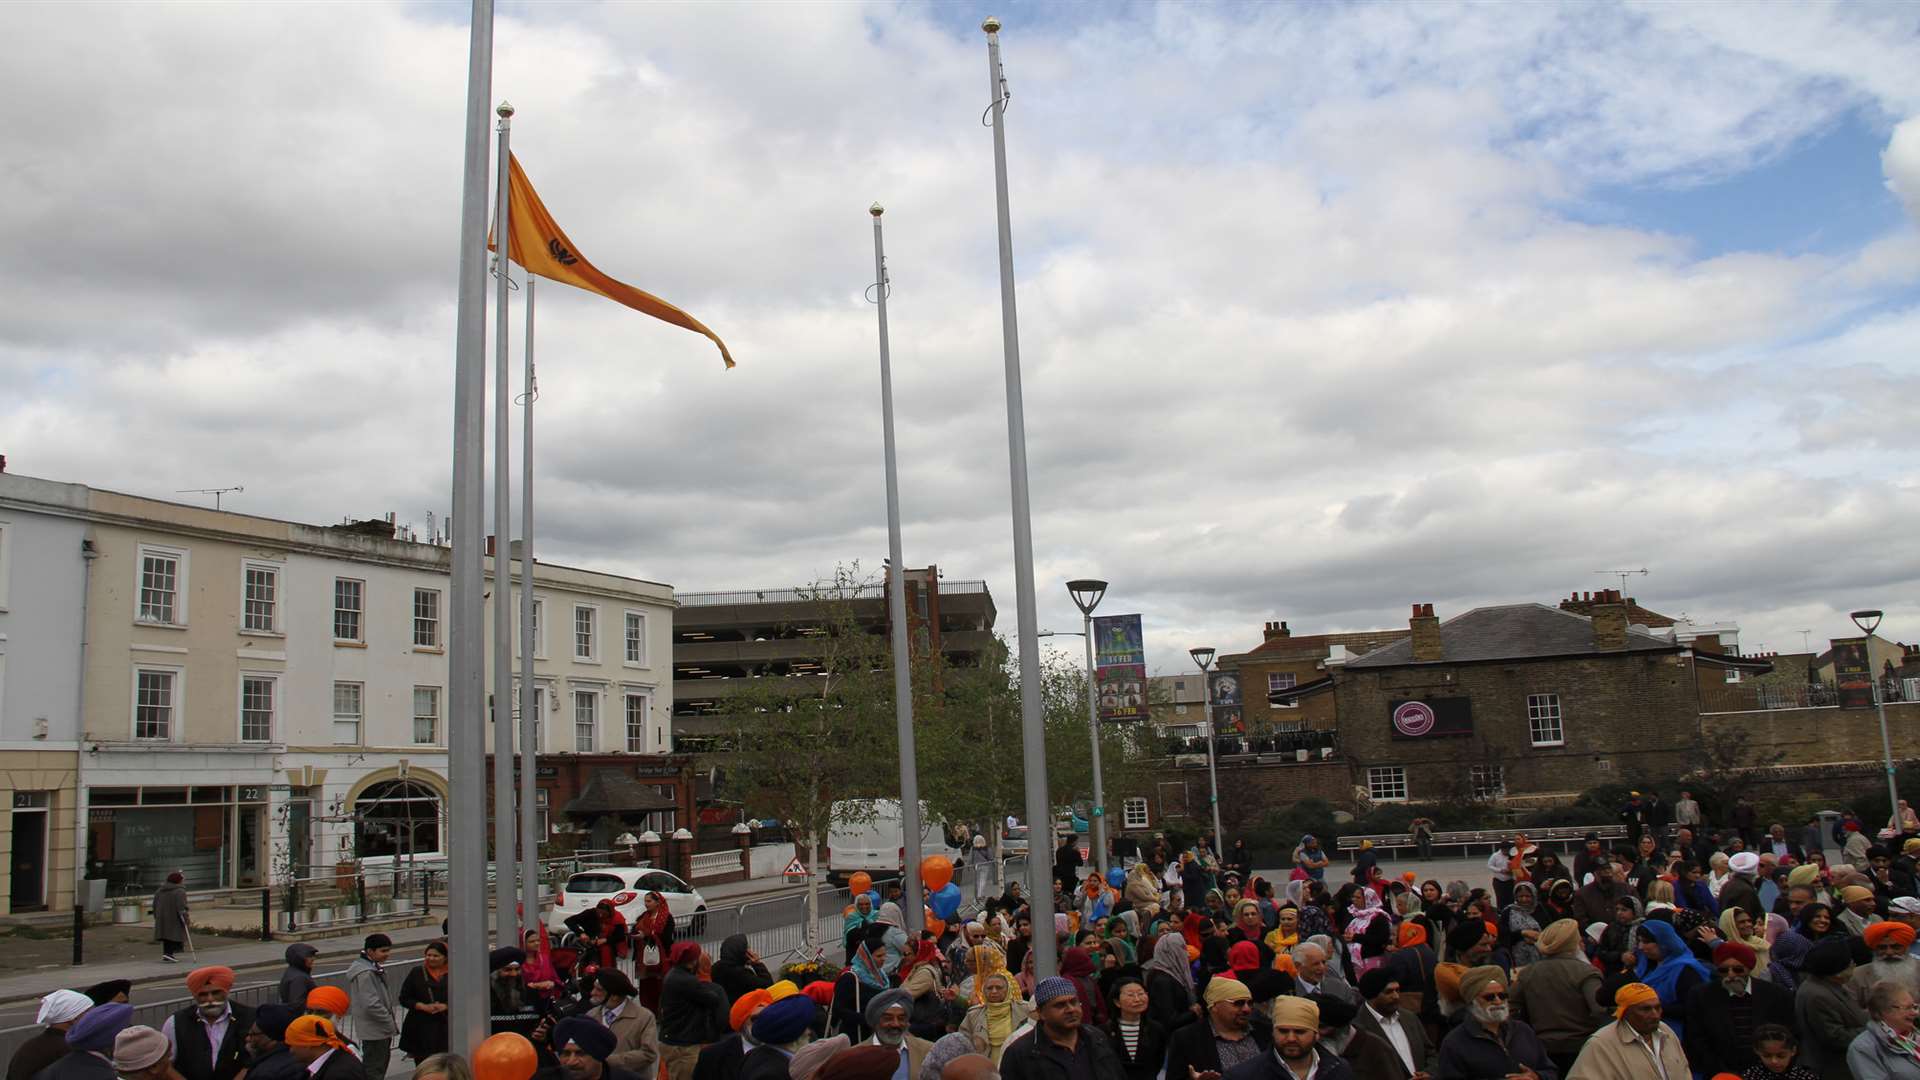 The flag was raised in Community Square to mark the start of Vaisakhi. Picture: Gravesham Borough Council